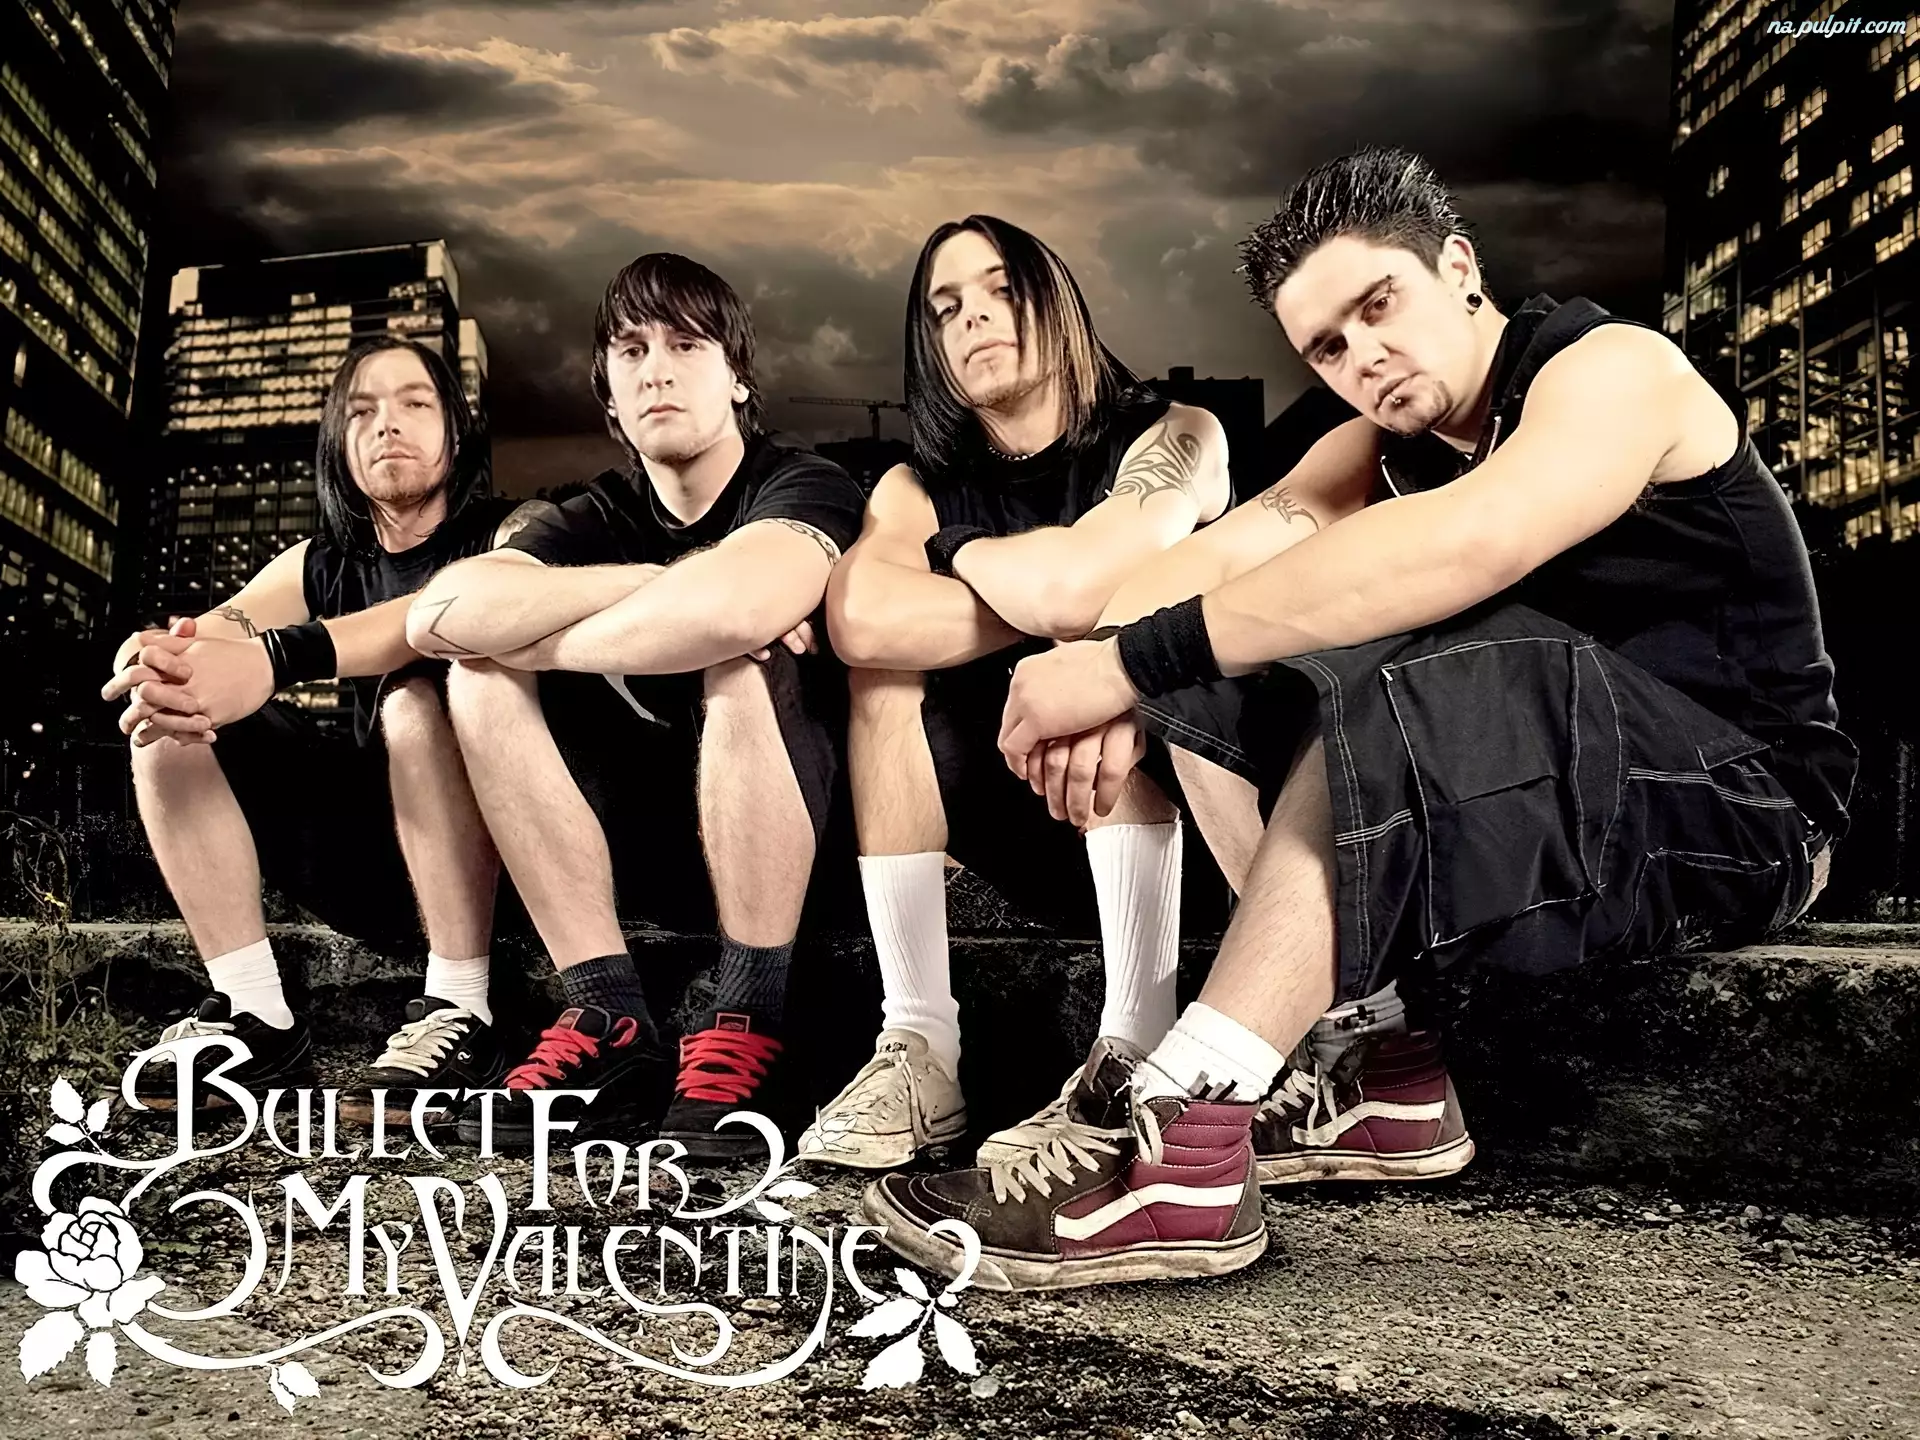 Bullet For My Valentine
, Rock